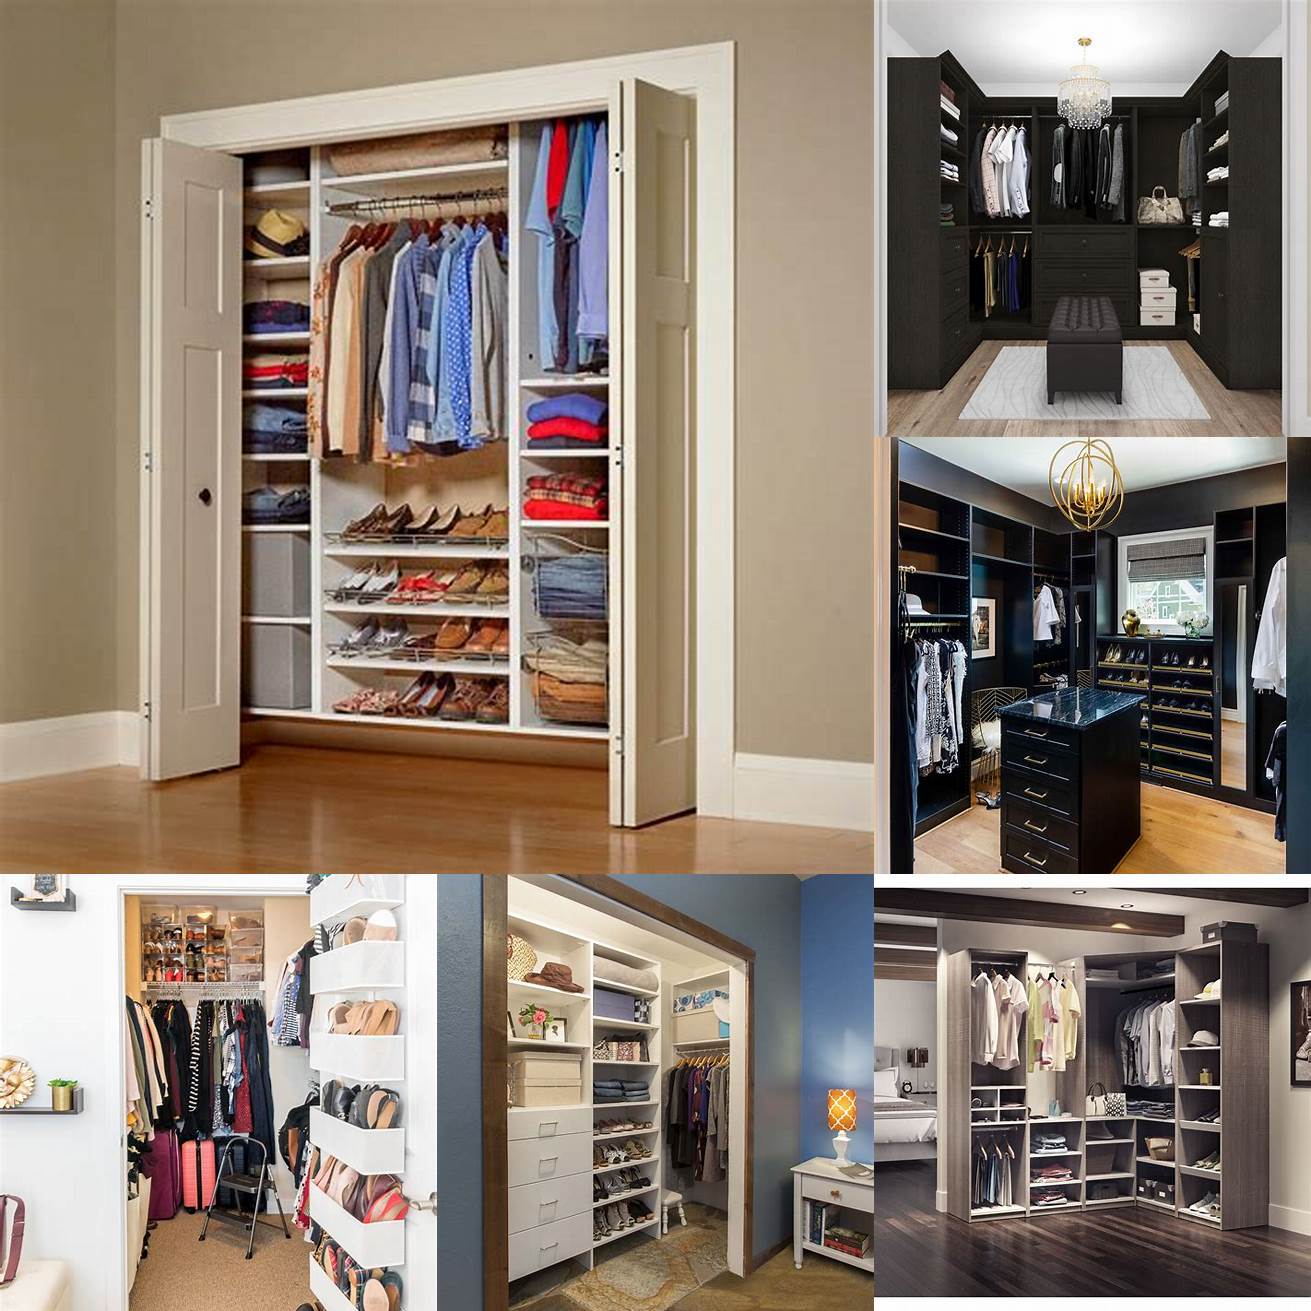 4 Budget Consider your budget when choosing closet furniture You can find closet furniture at different price points to suit your needs and budget